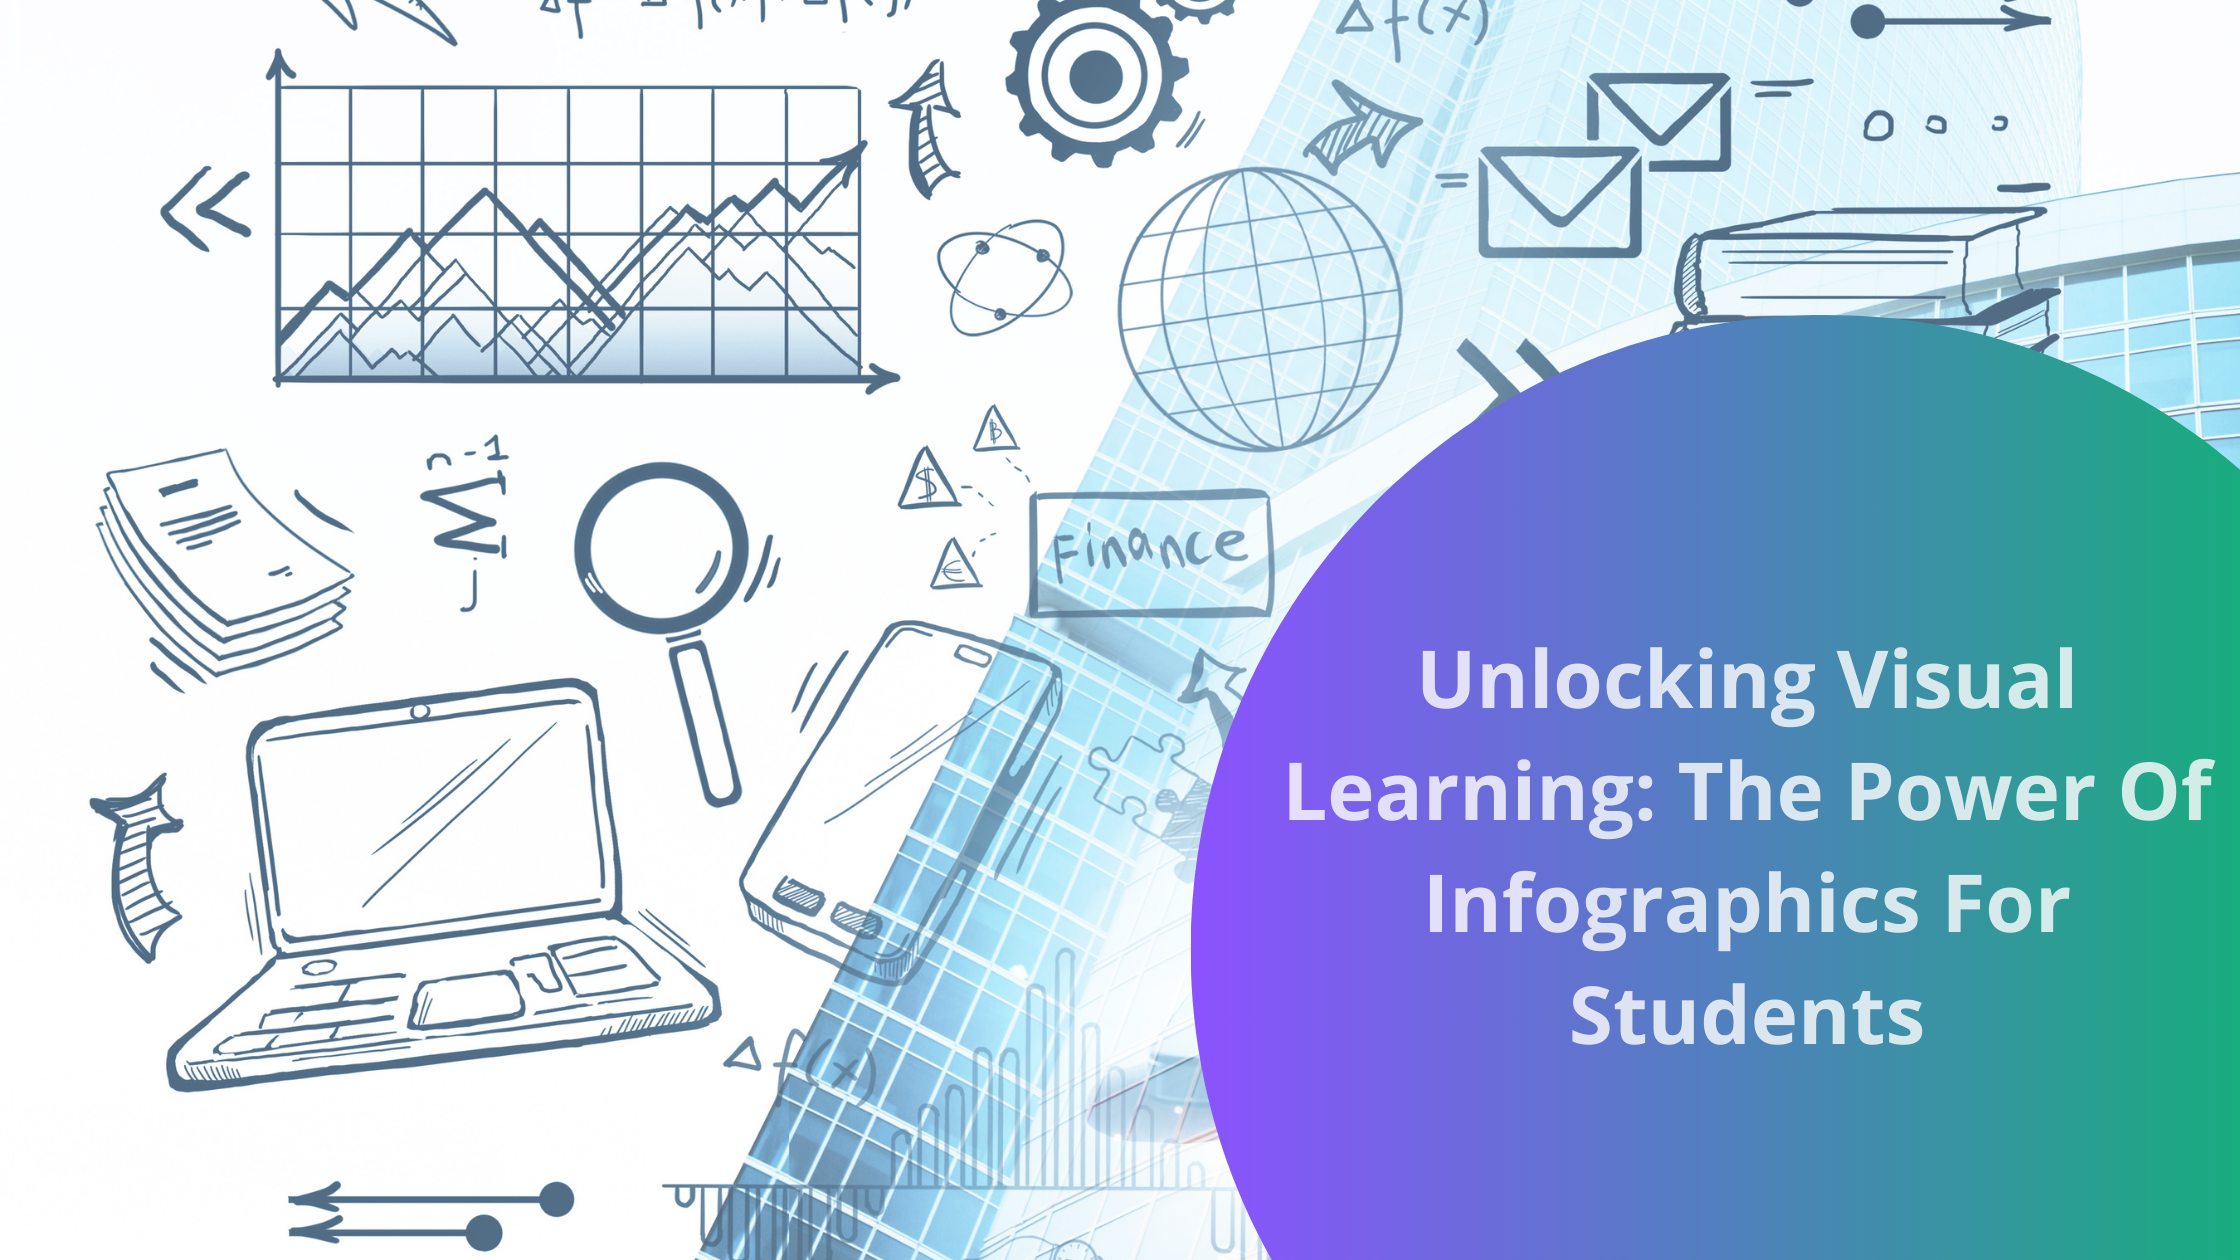 Unlocking visual learning: the power of infographics for students | bookafy